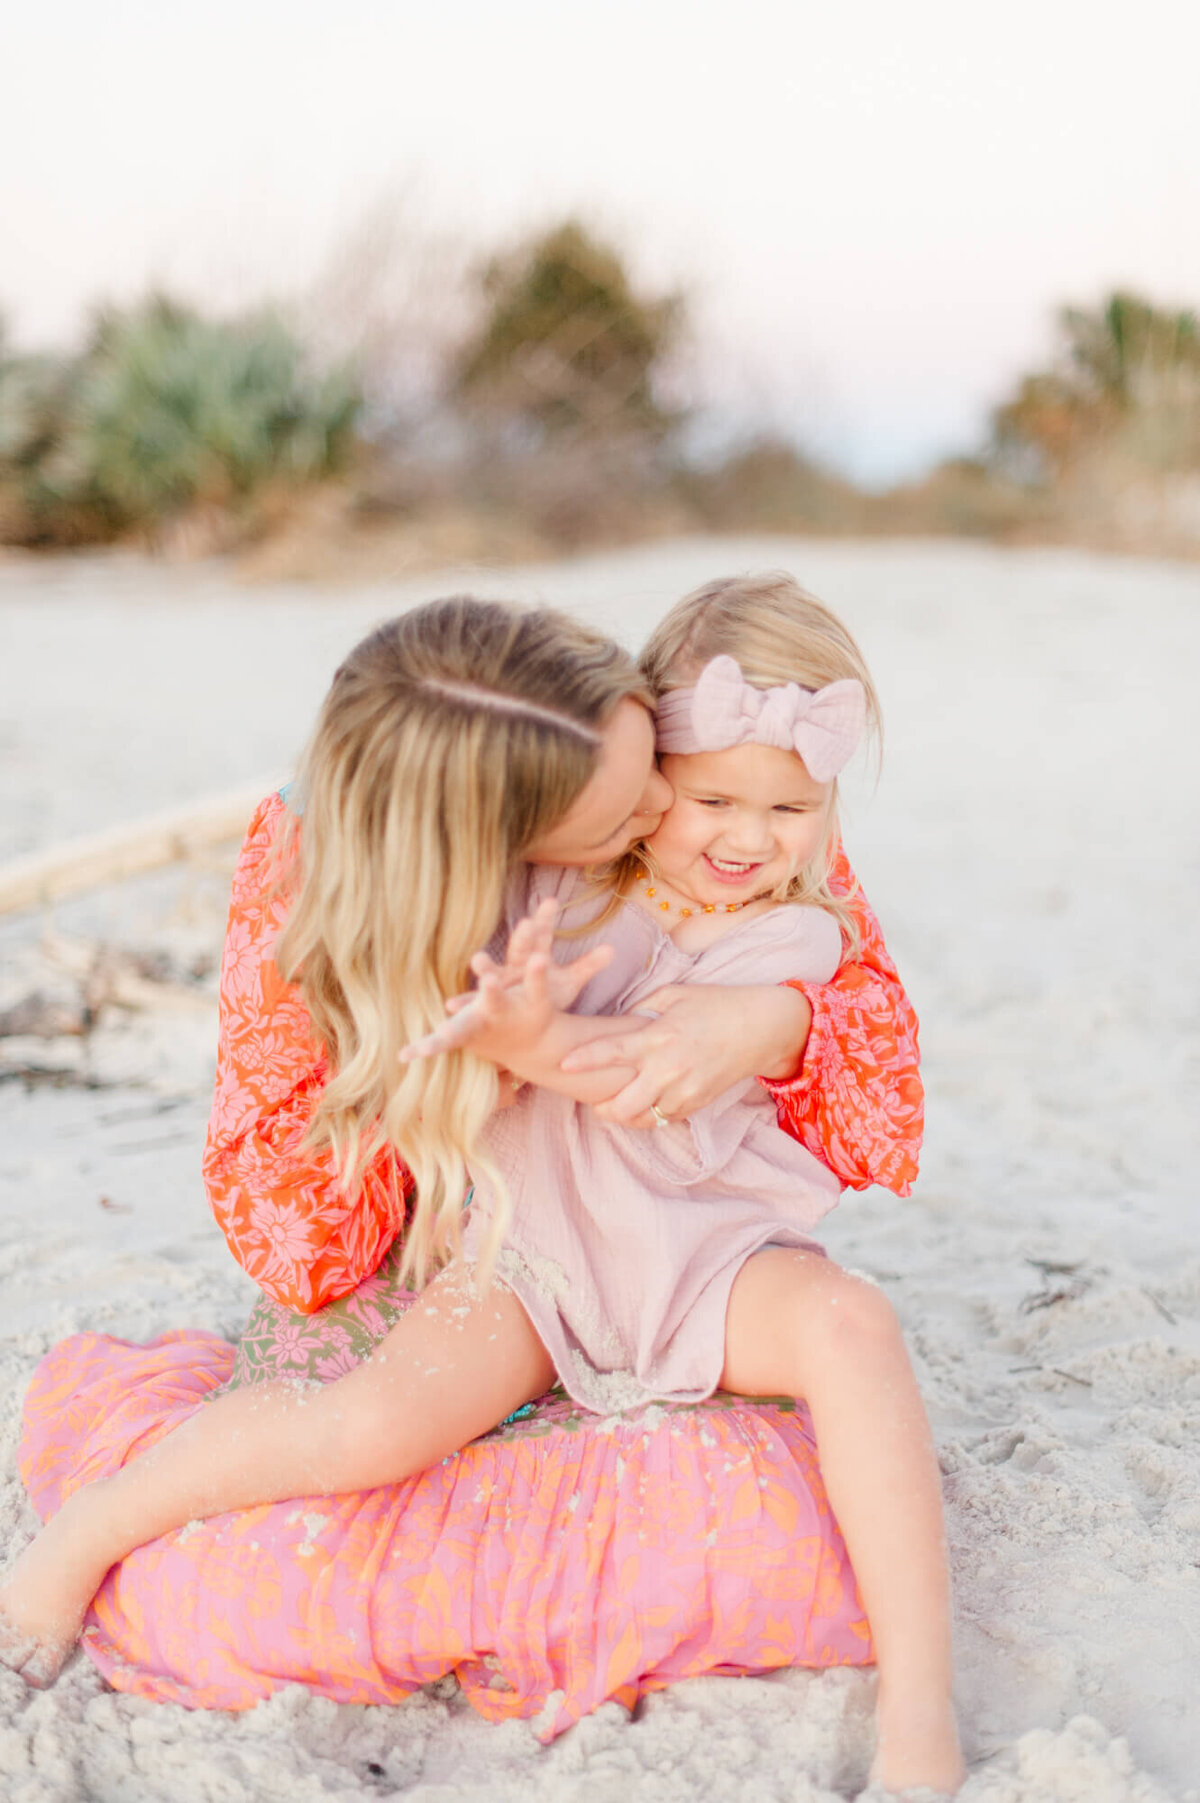 Mom kissing daughter while she laughs and plays in the sand